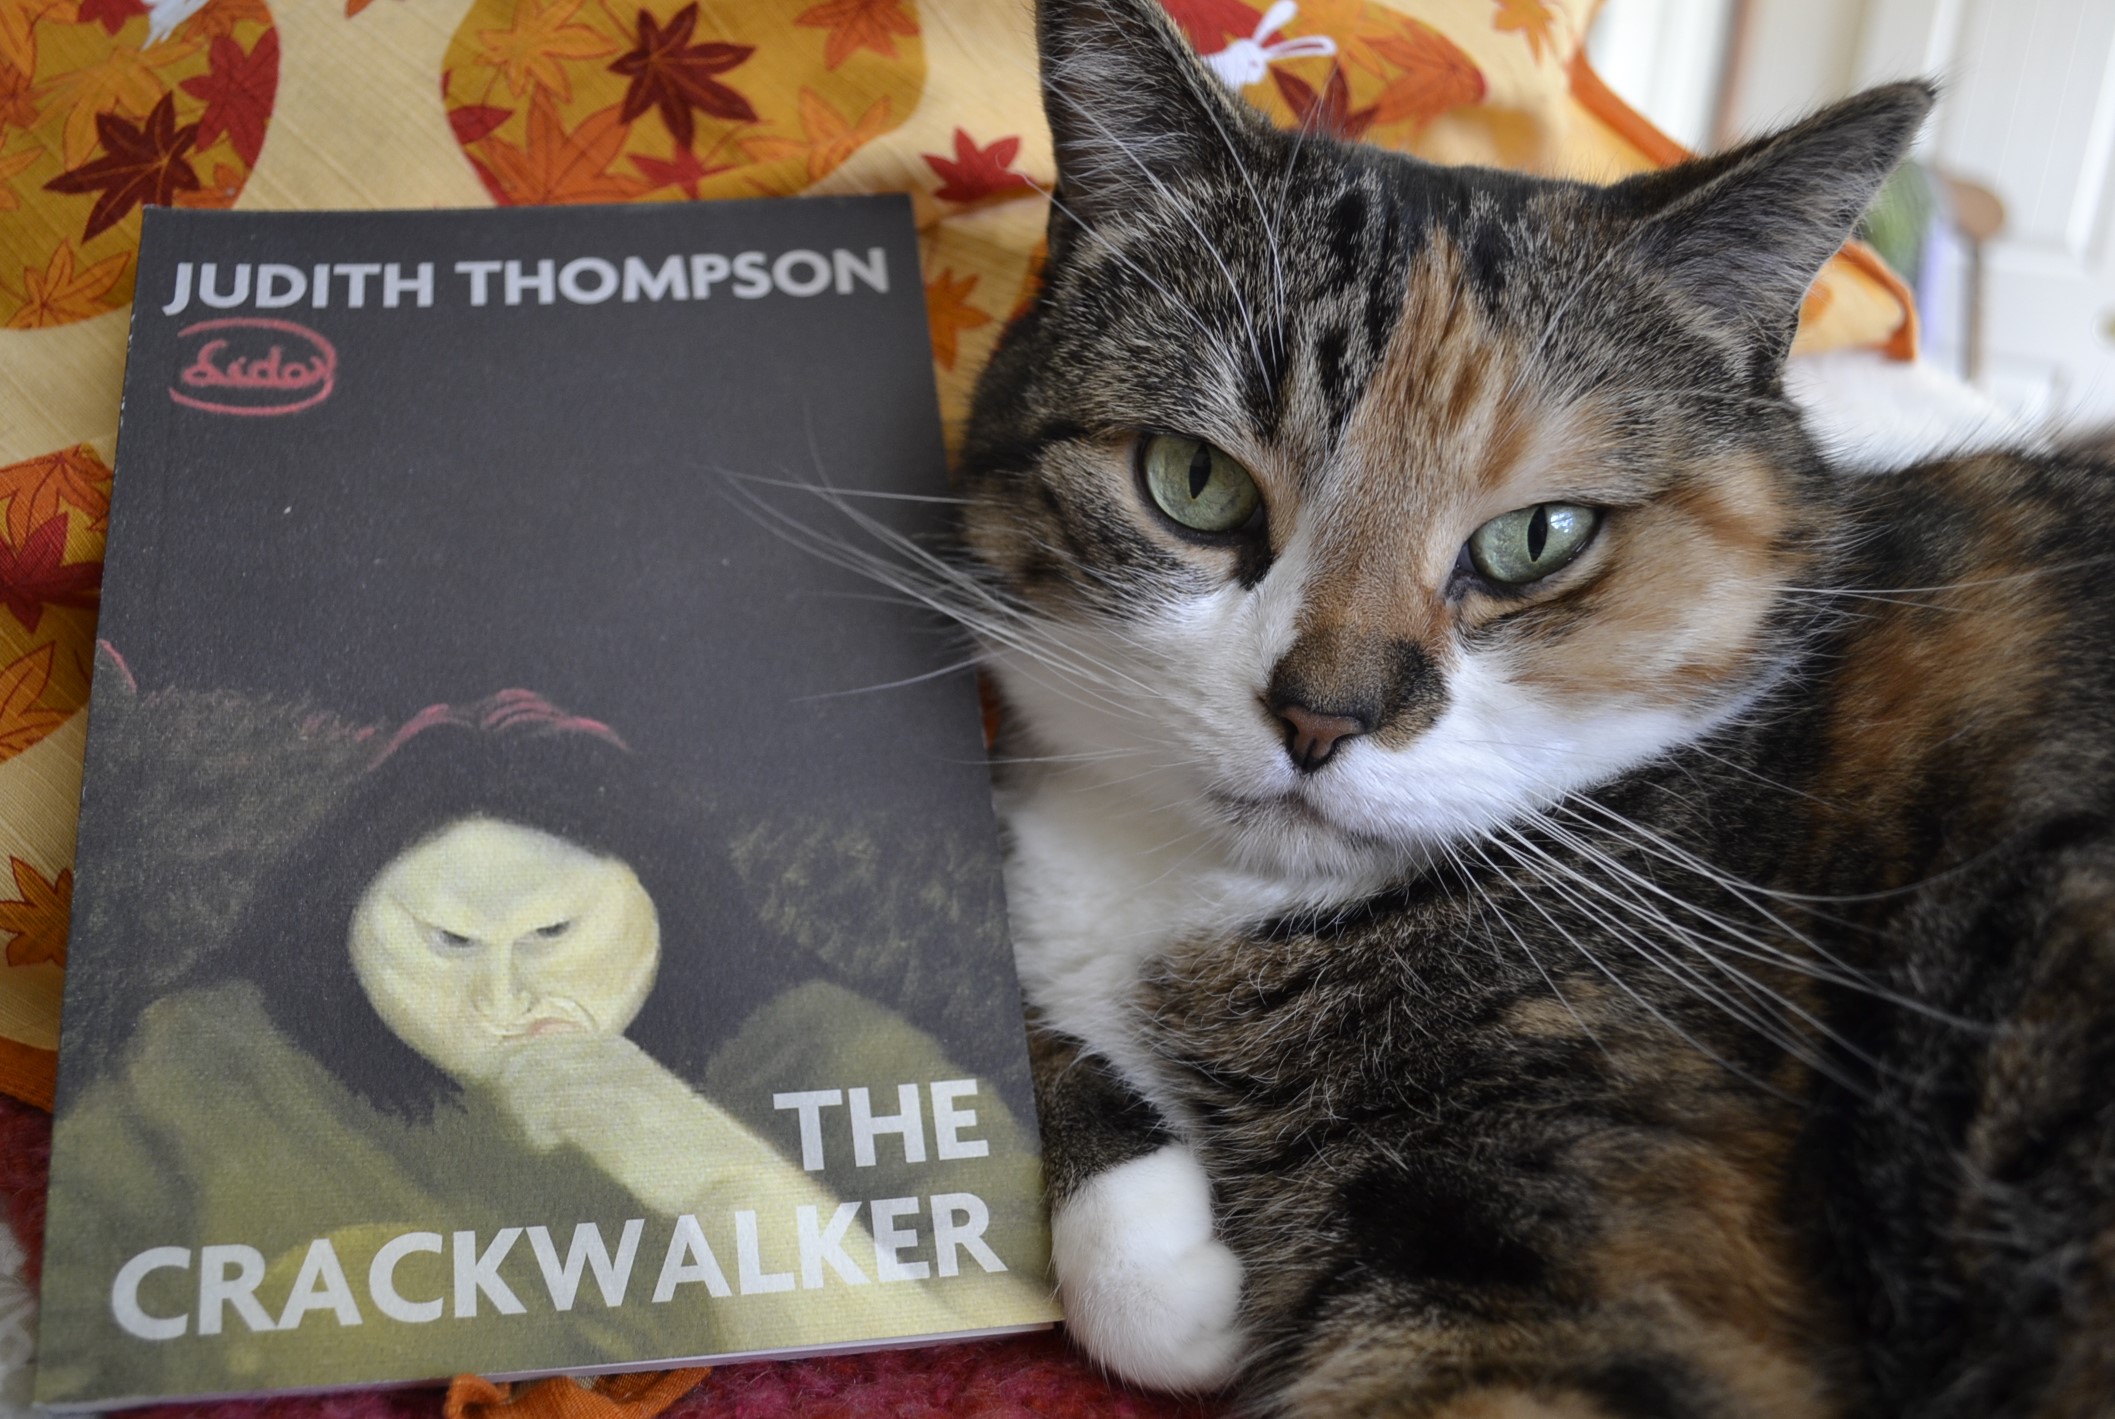 A calico tabby leans glamorously against the side of Judith Thompson's The Crackwalker.